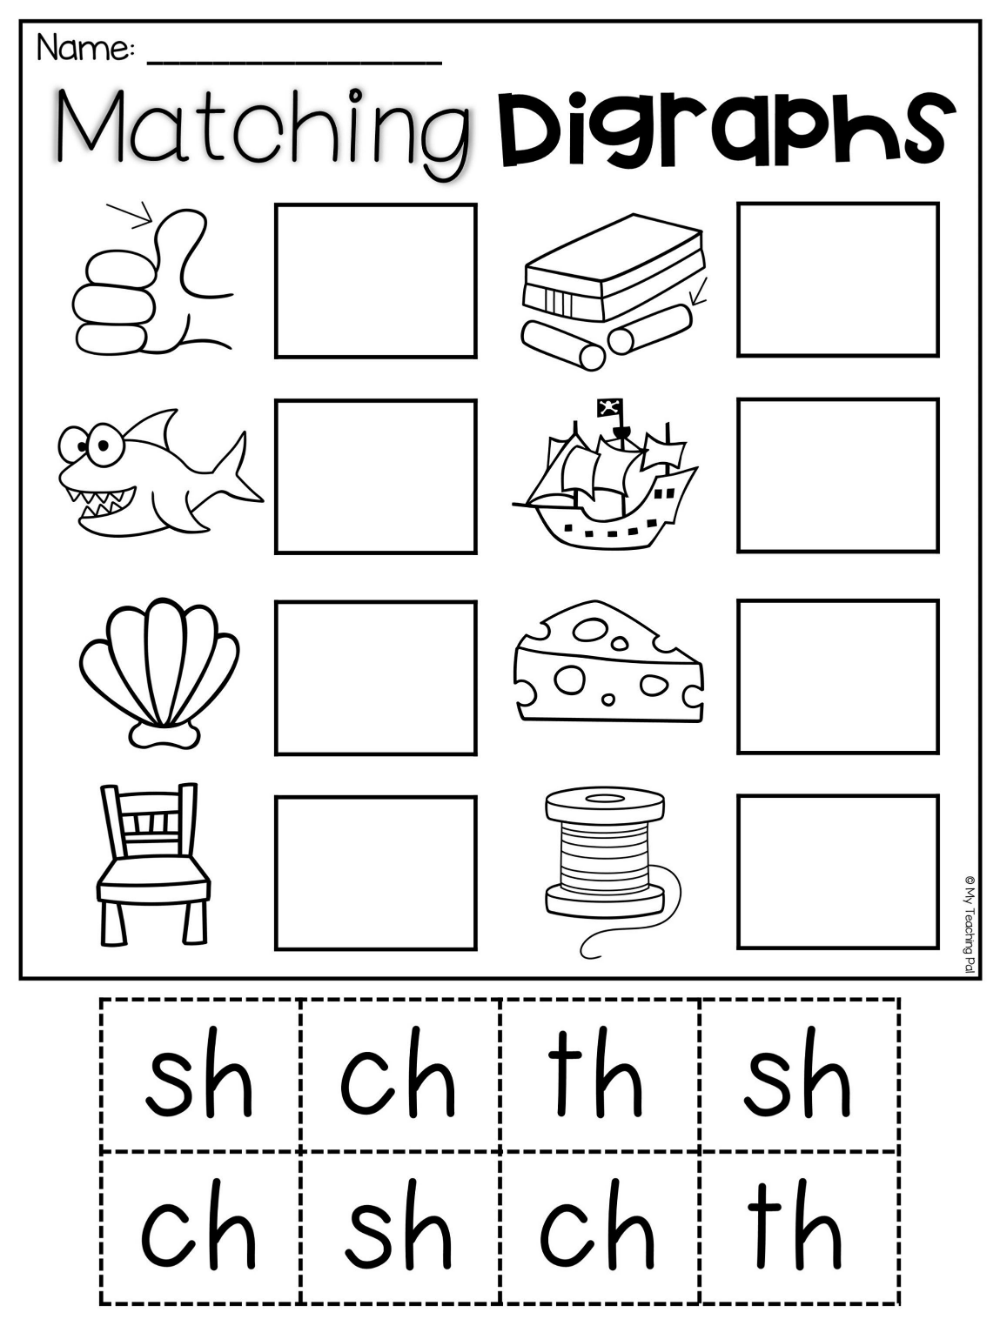 Pin On Phonics - Free Printable Ch Digraph Worksheets